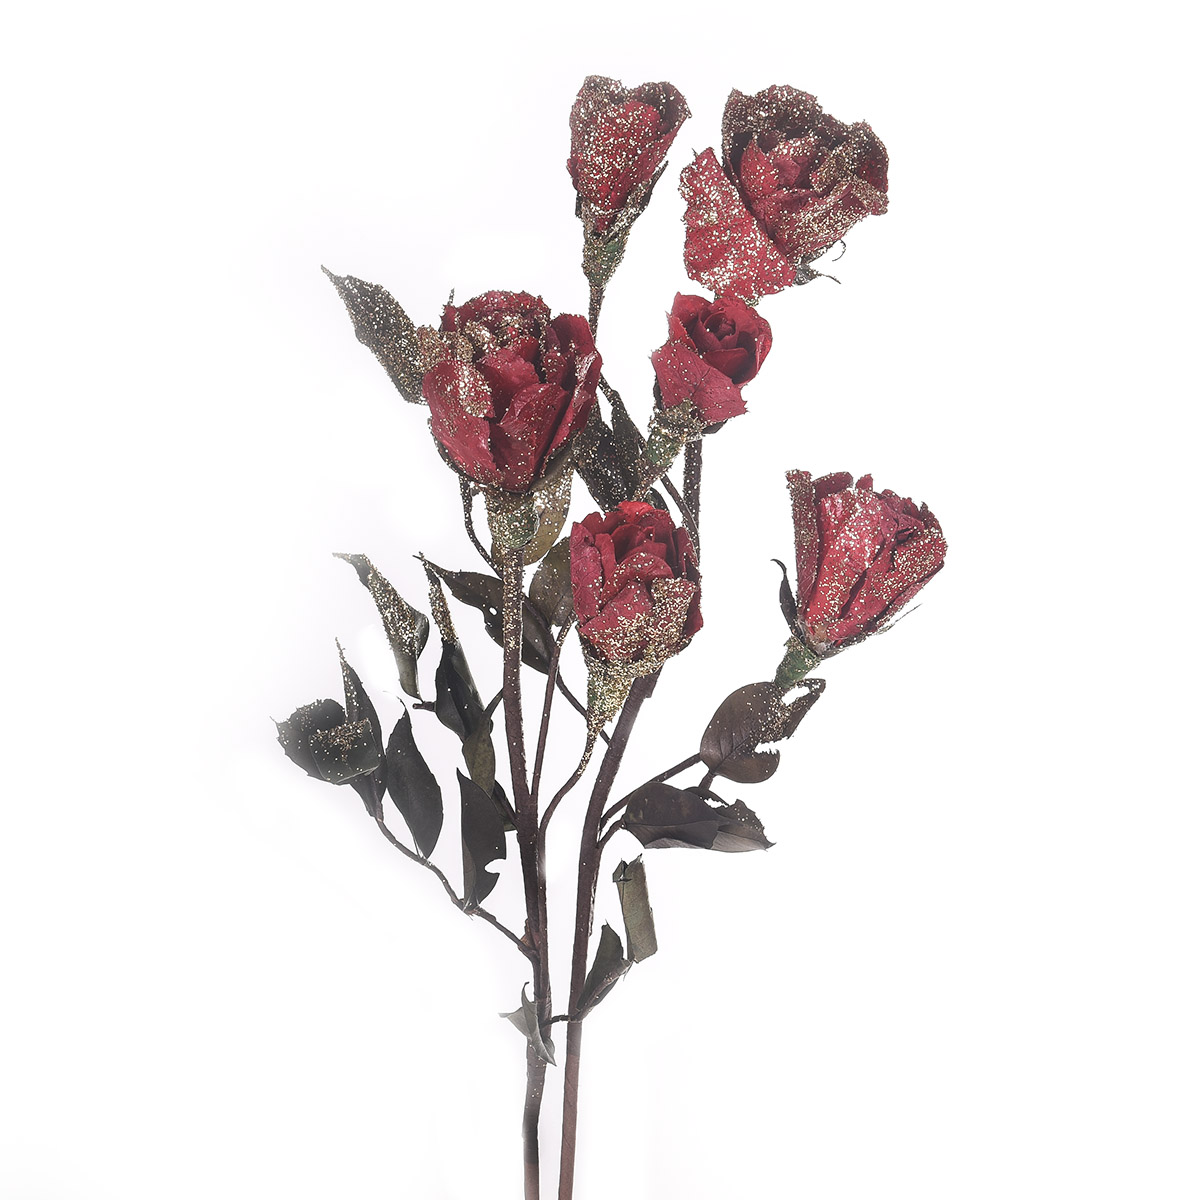 NATURAL PRODUCTS DRIED FLOWERS AND ERBS,EXOTICS AND DECORATION,ROSA 2 FIORI 1 BOC. NATALIZIA